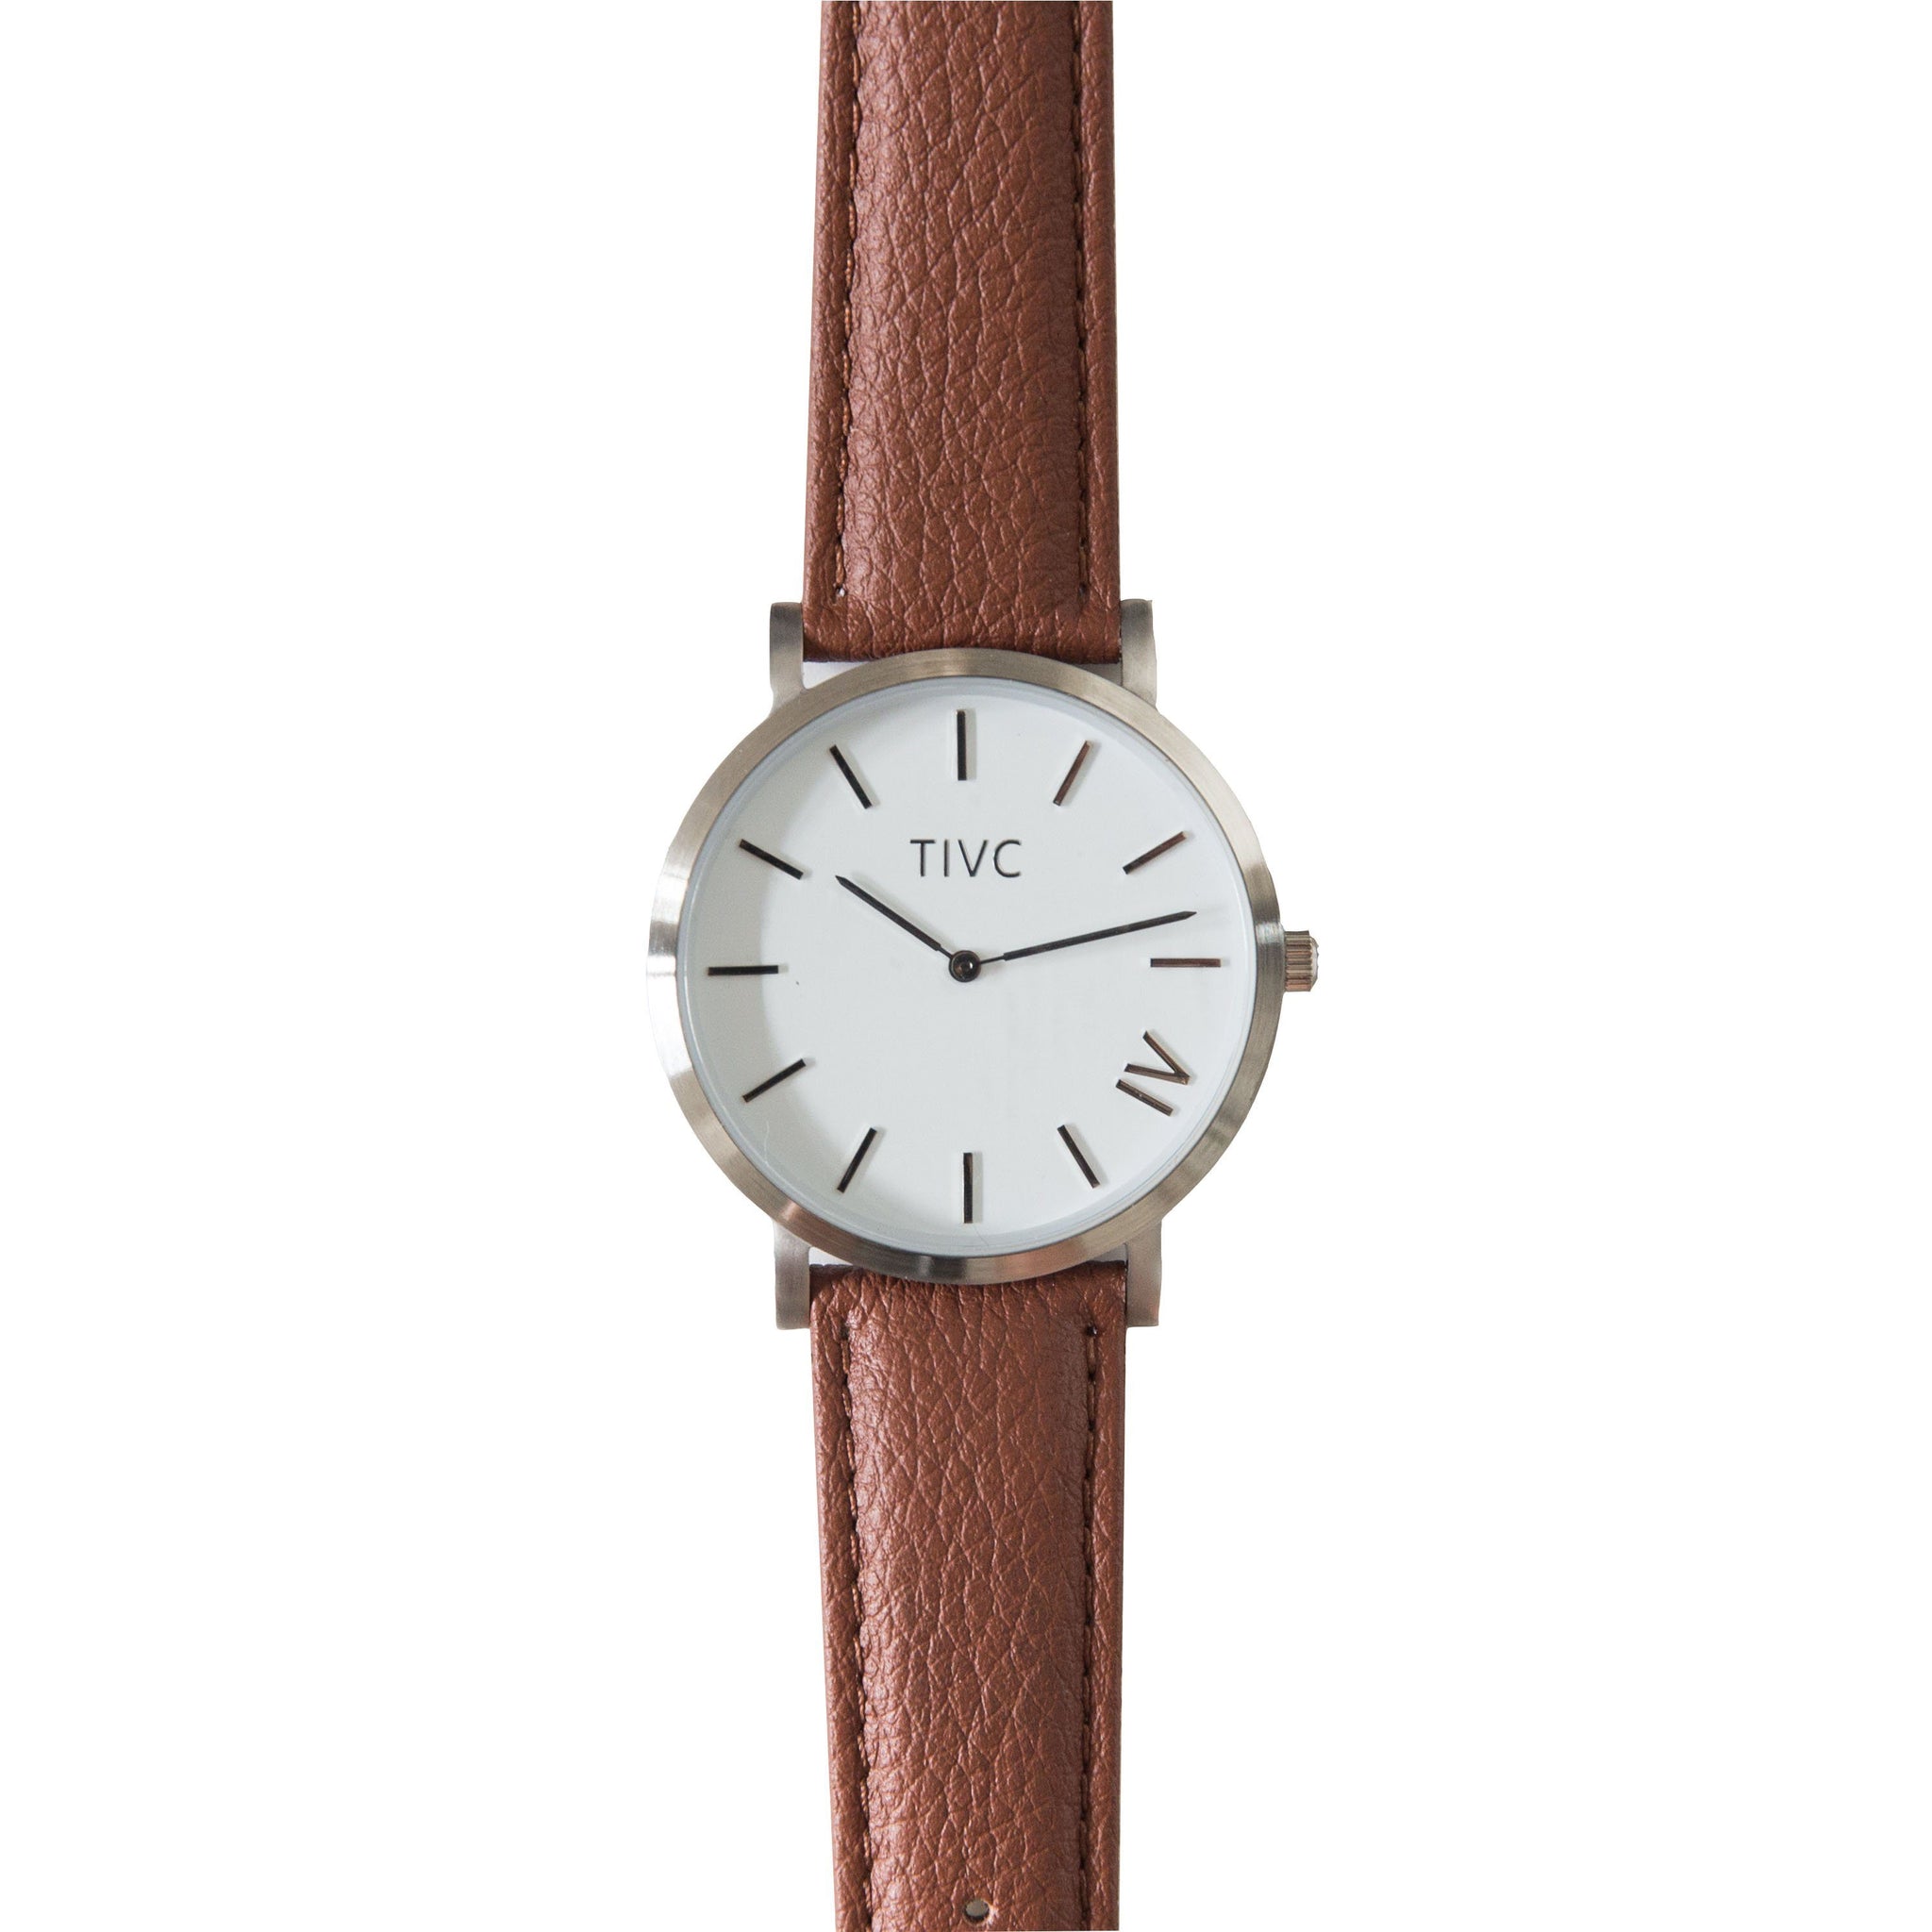 Silver Vegan Watch and Tan Stitched Vegan Leather Band - Time IV Change